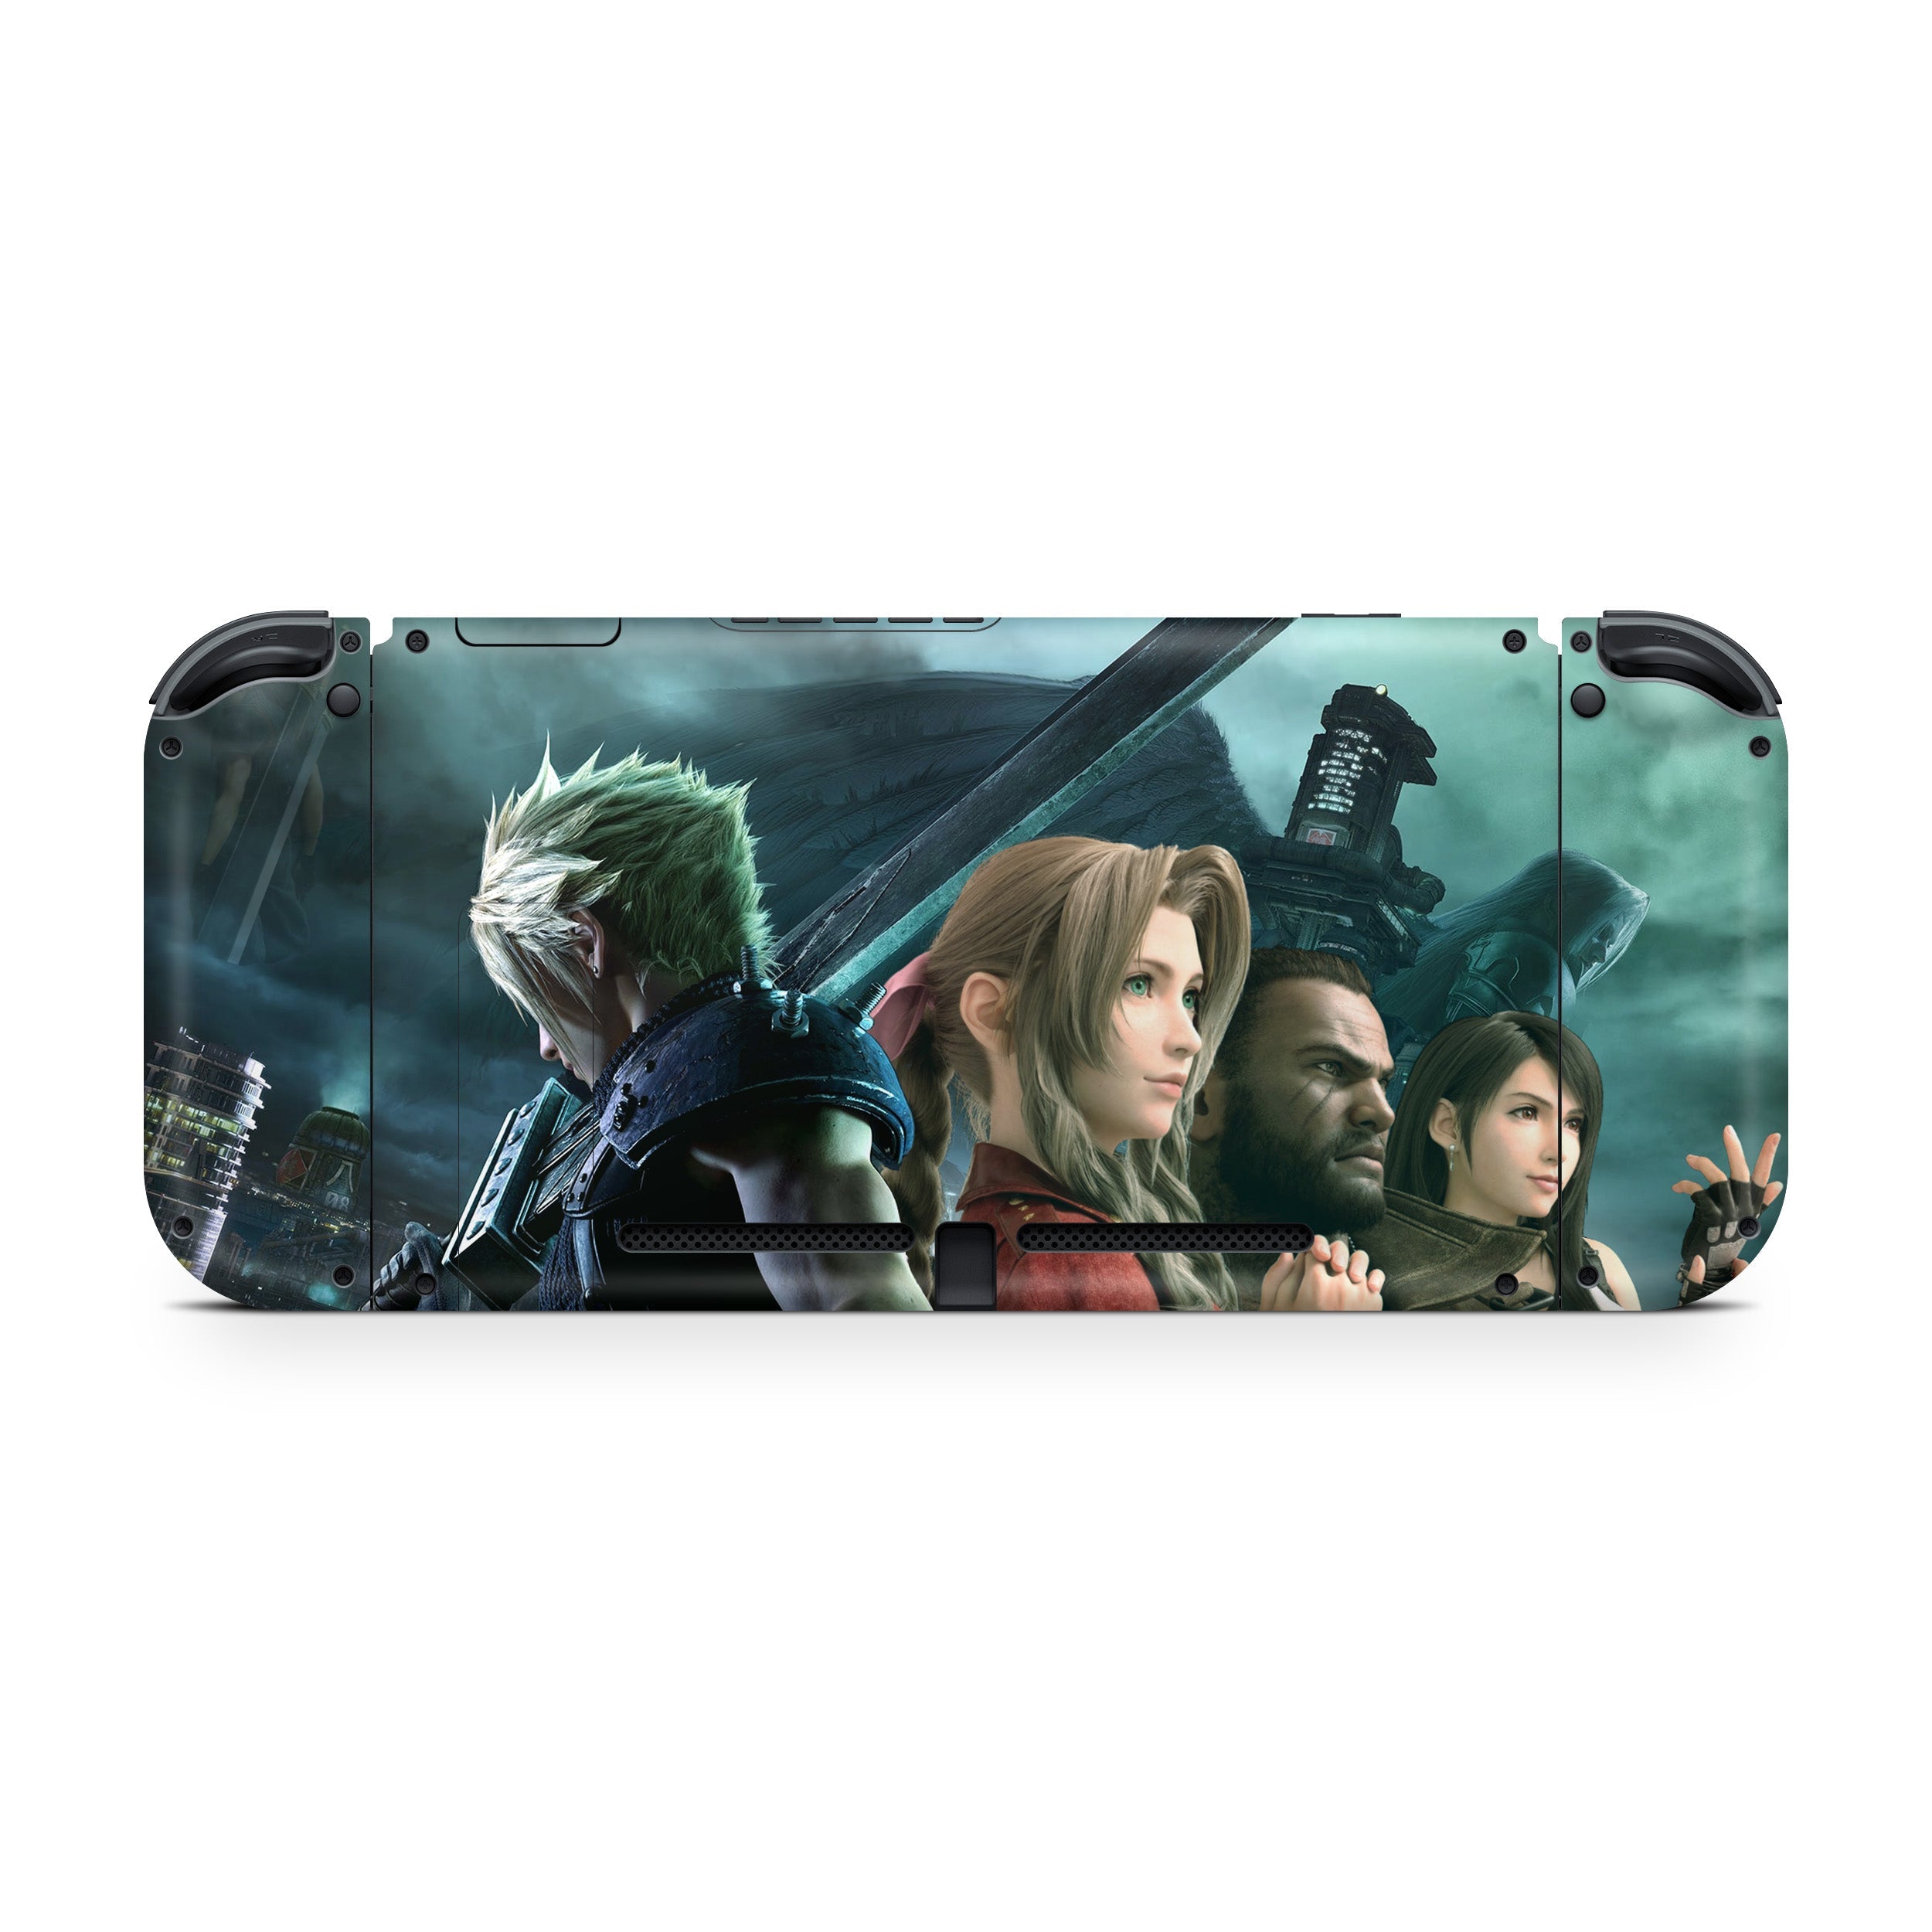 A video game skin featuring a Final Fantasy 7 Group design for the Nintendo Switch.